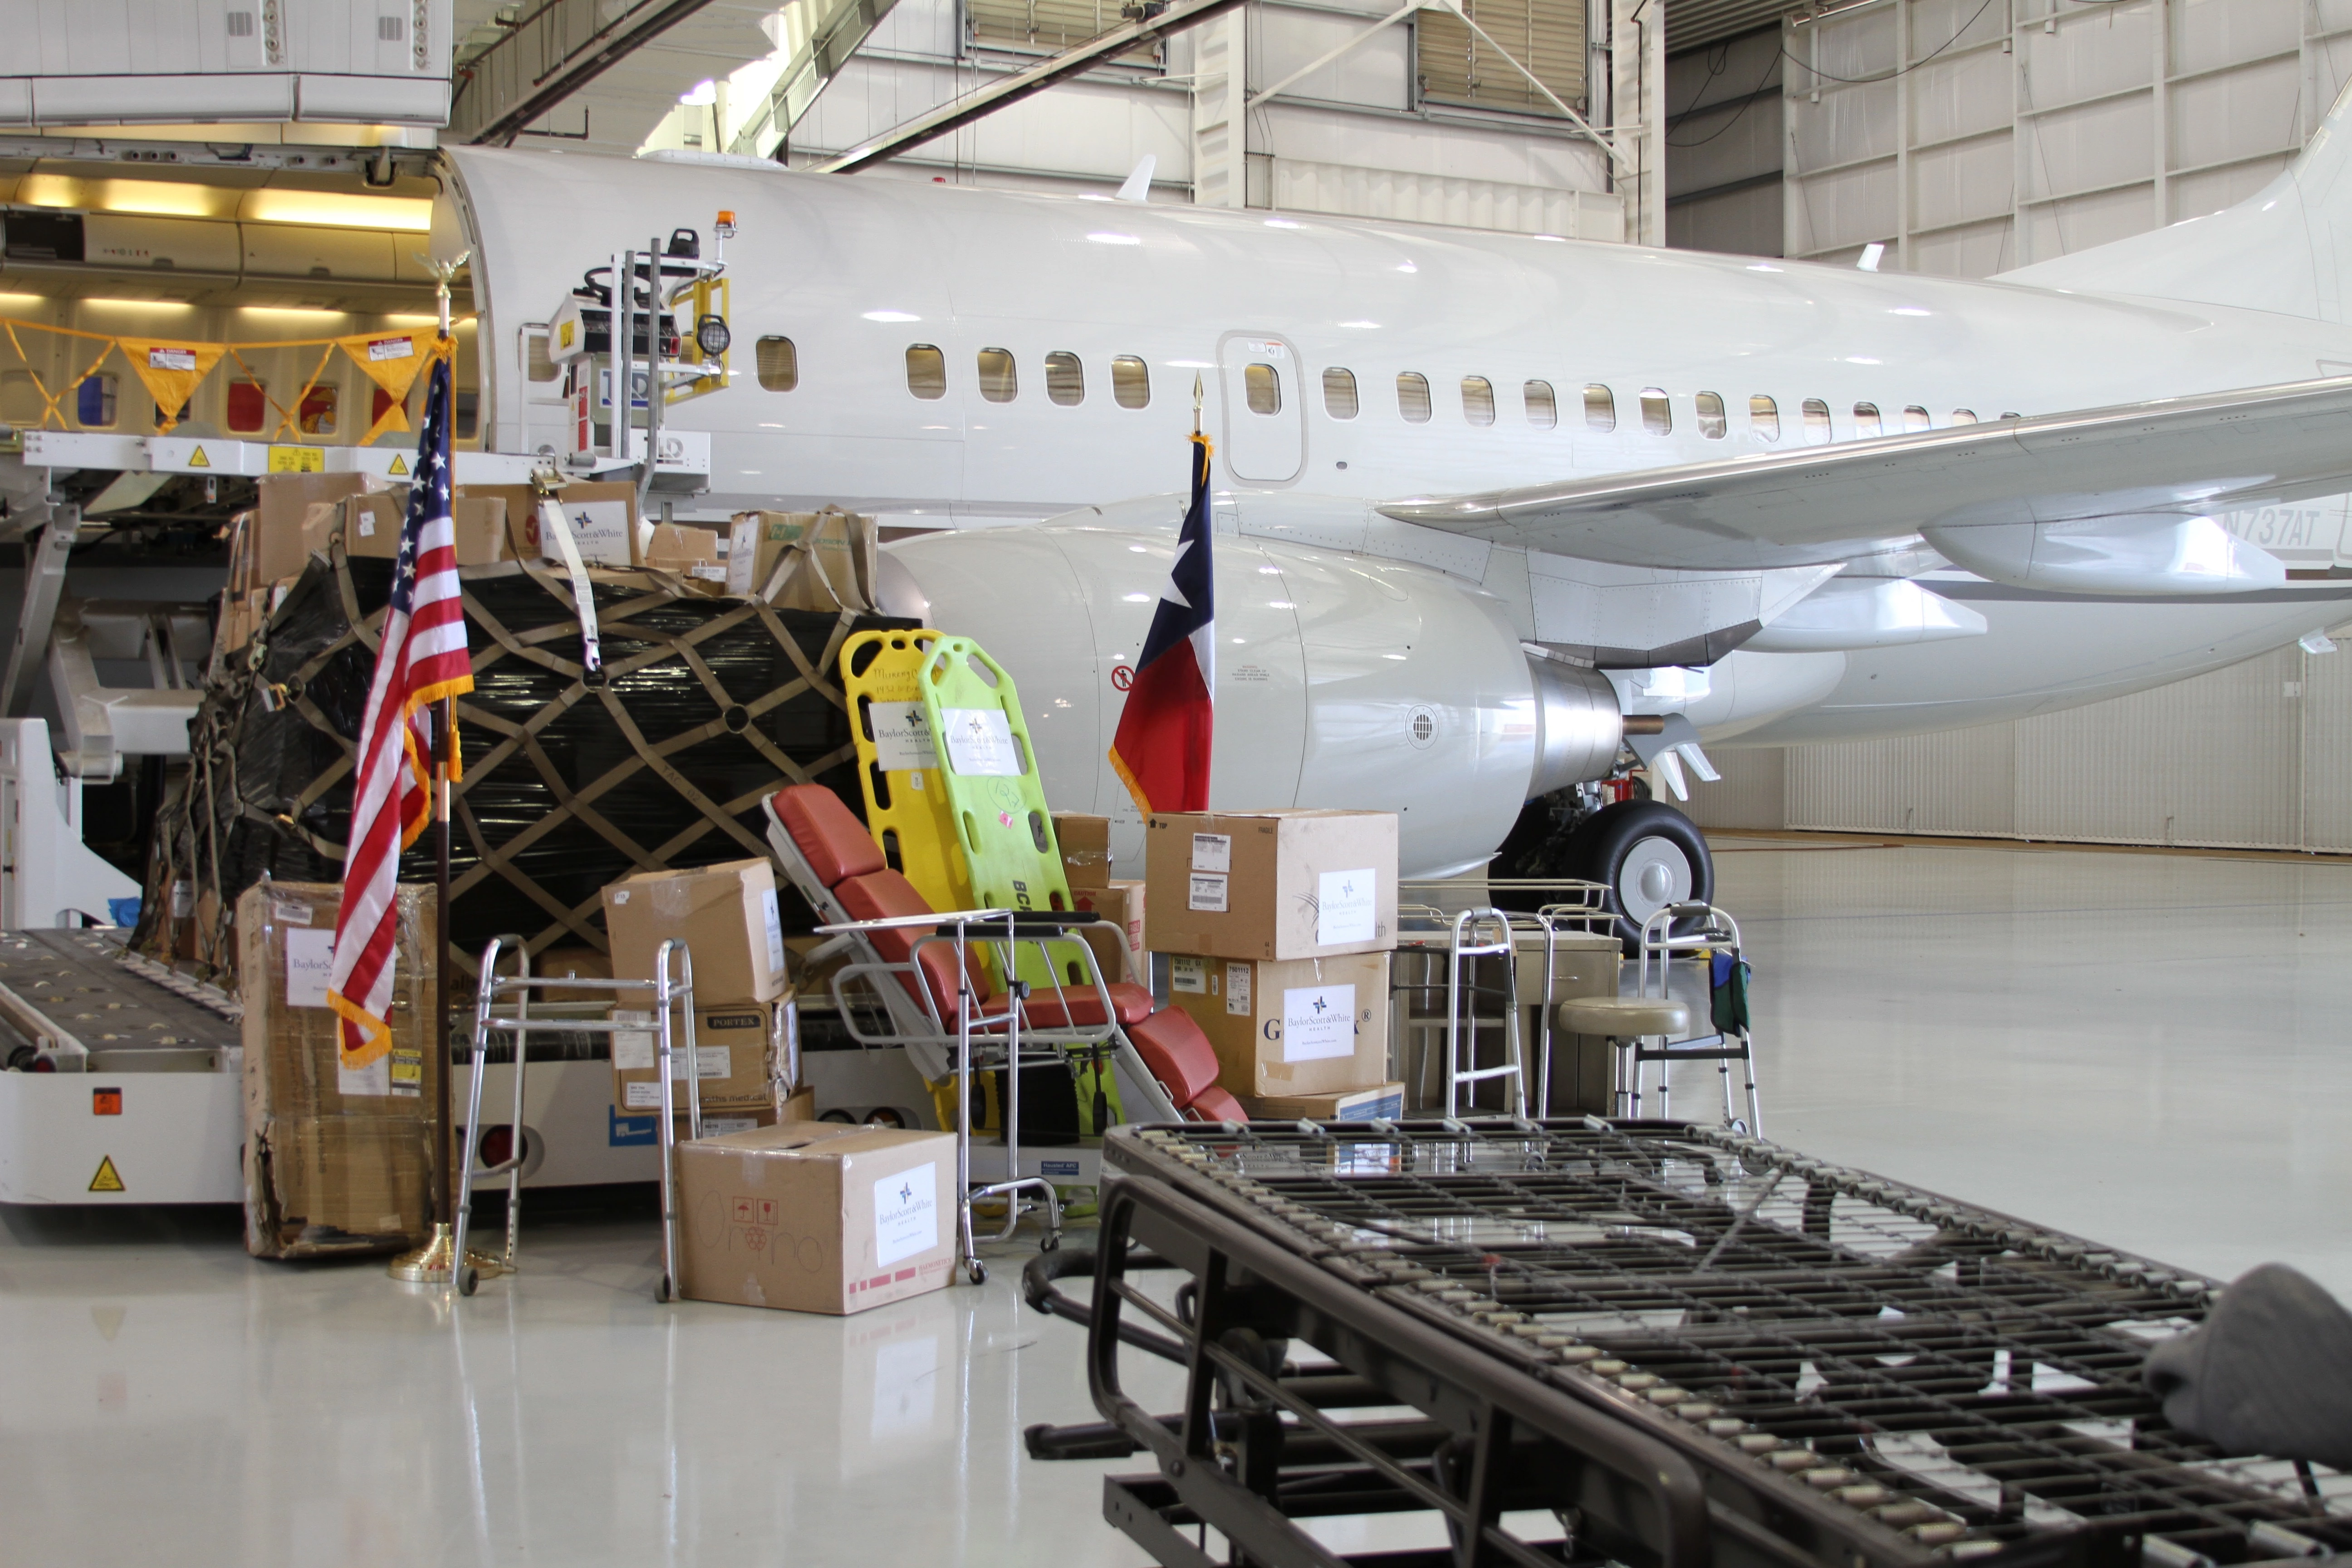 Cargo is prepped for transport on the Boeing 737 aircraft.